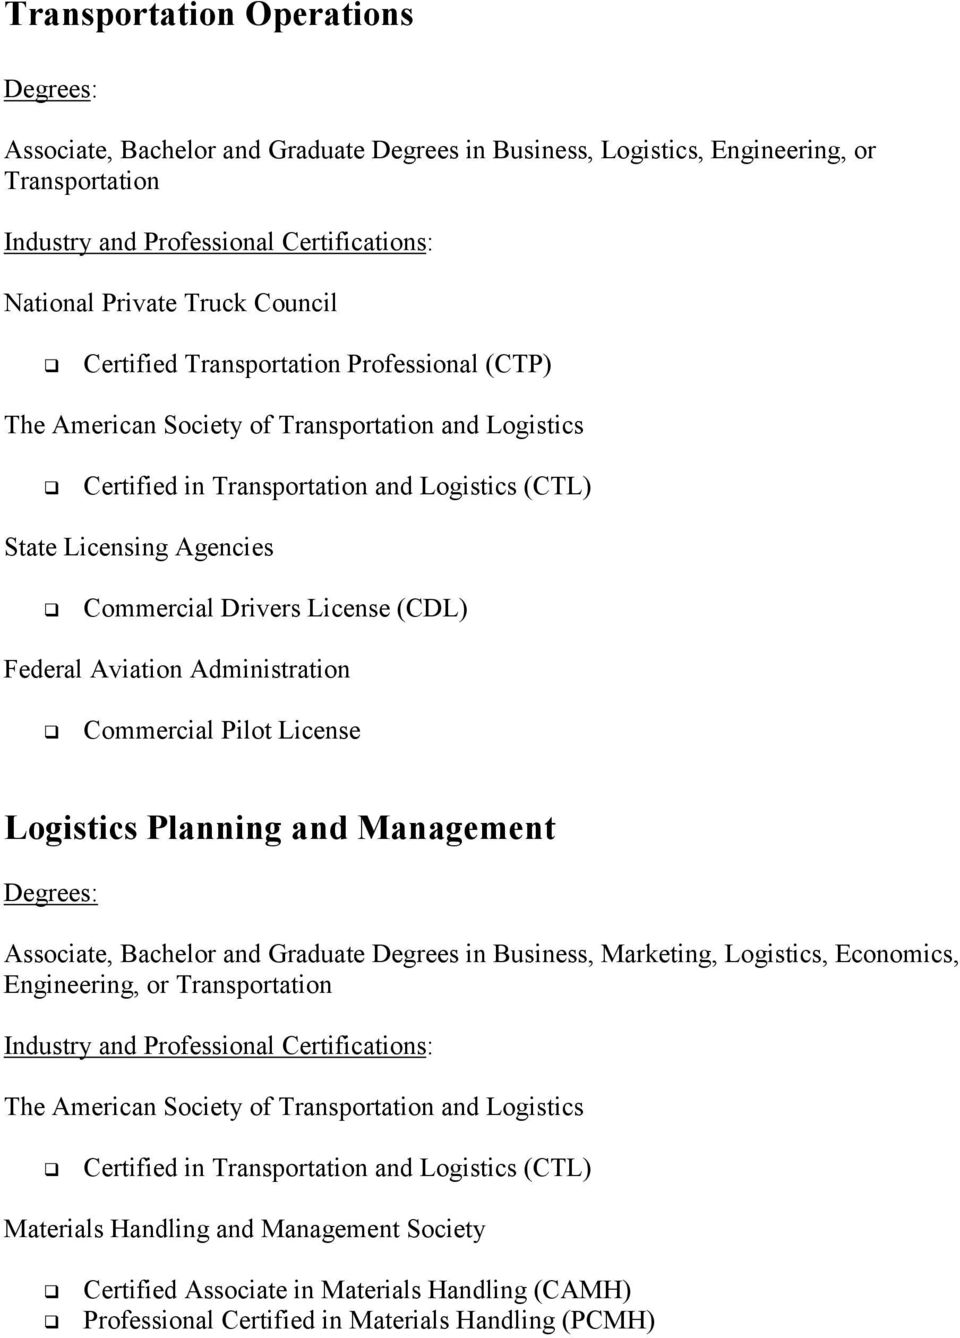 Commercial Pilot License Logistics Planning and Management Associate, Bachelor and Graduate Degrees in Business, Marketing, Logistics, Economics, Engineering, or Transportation The American Society